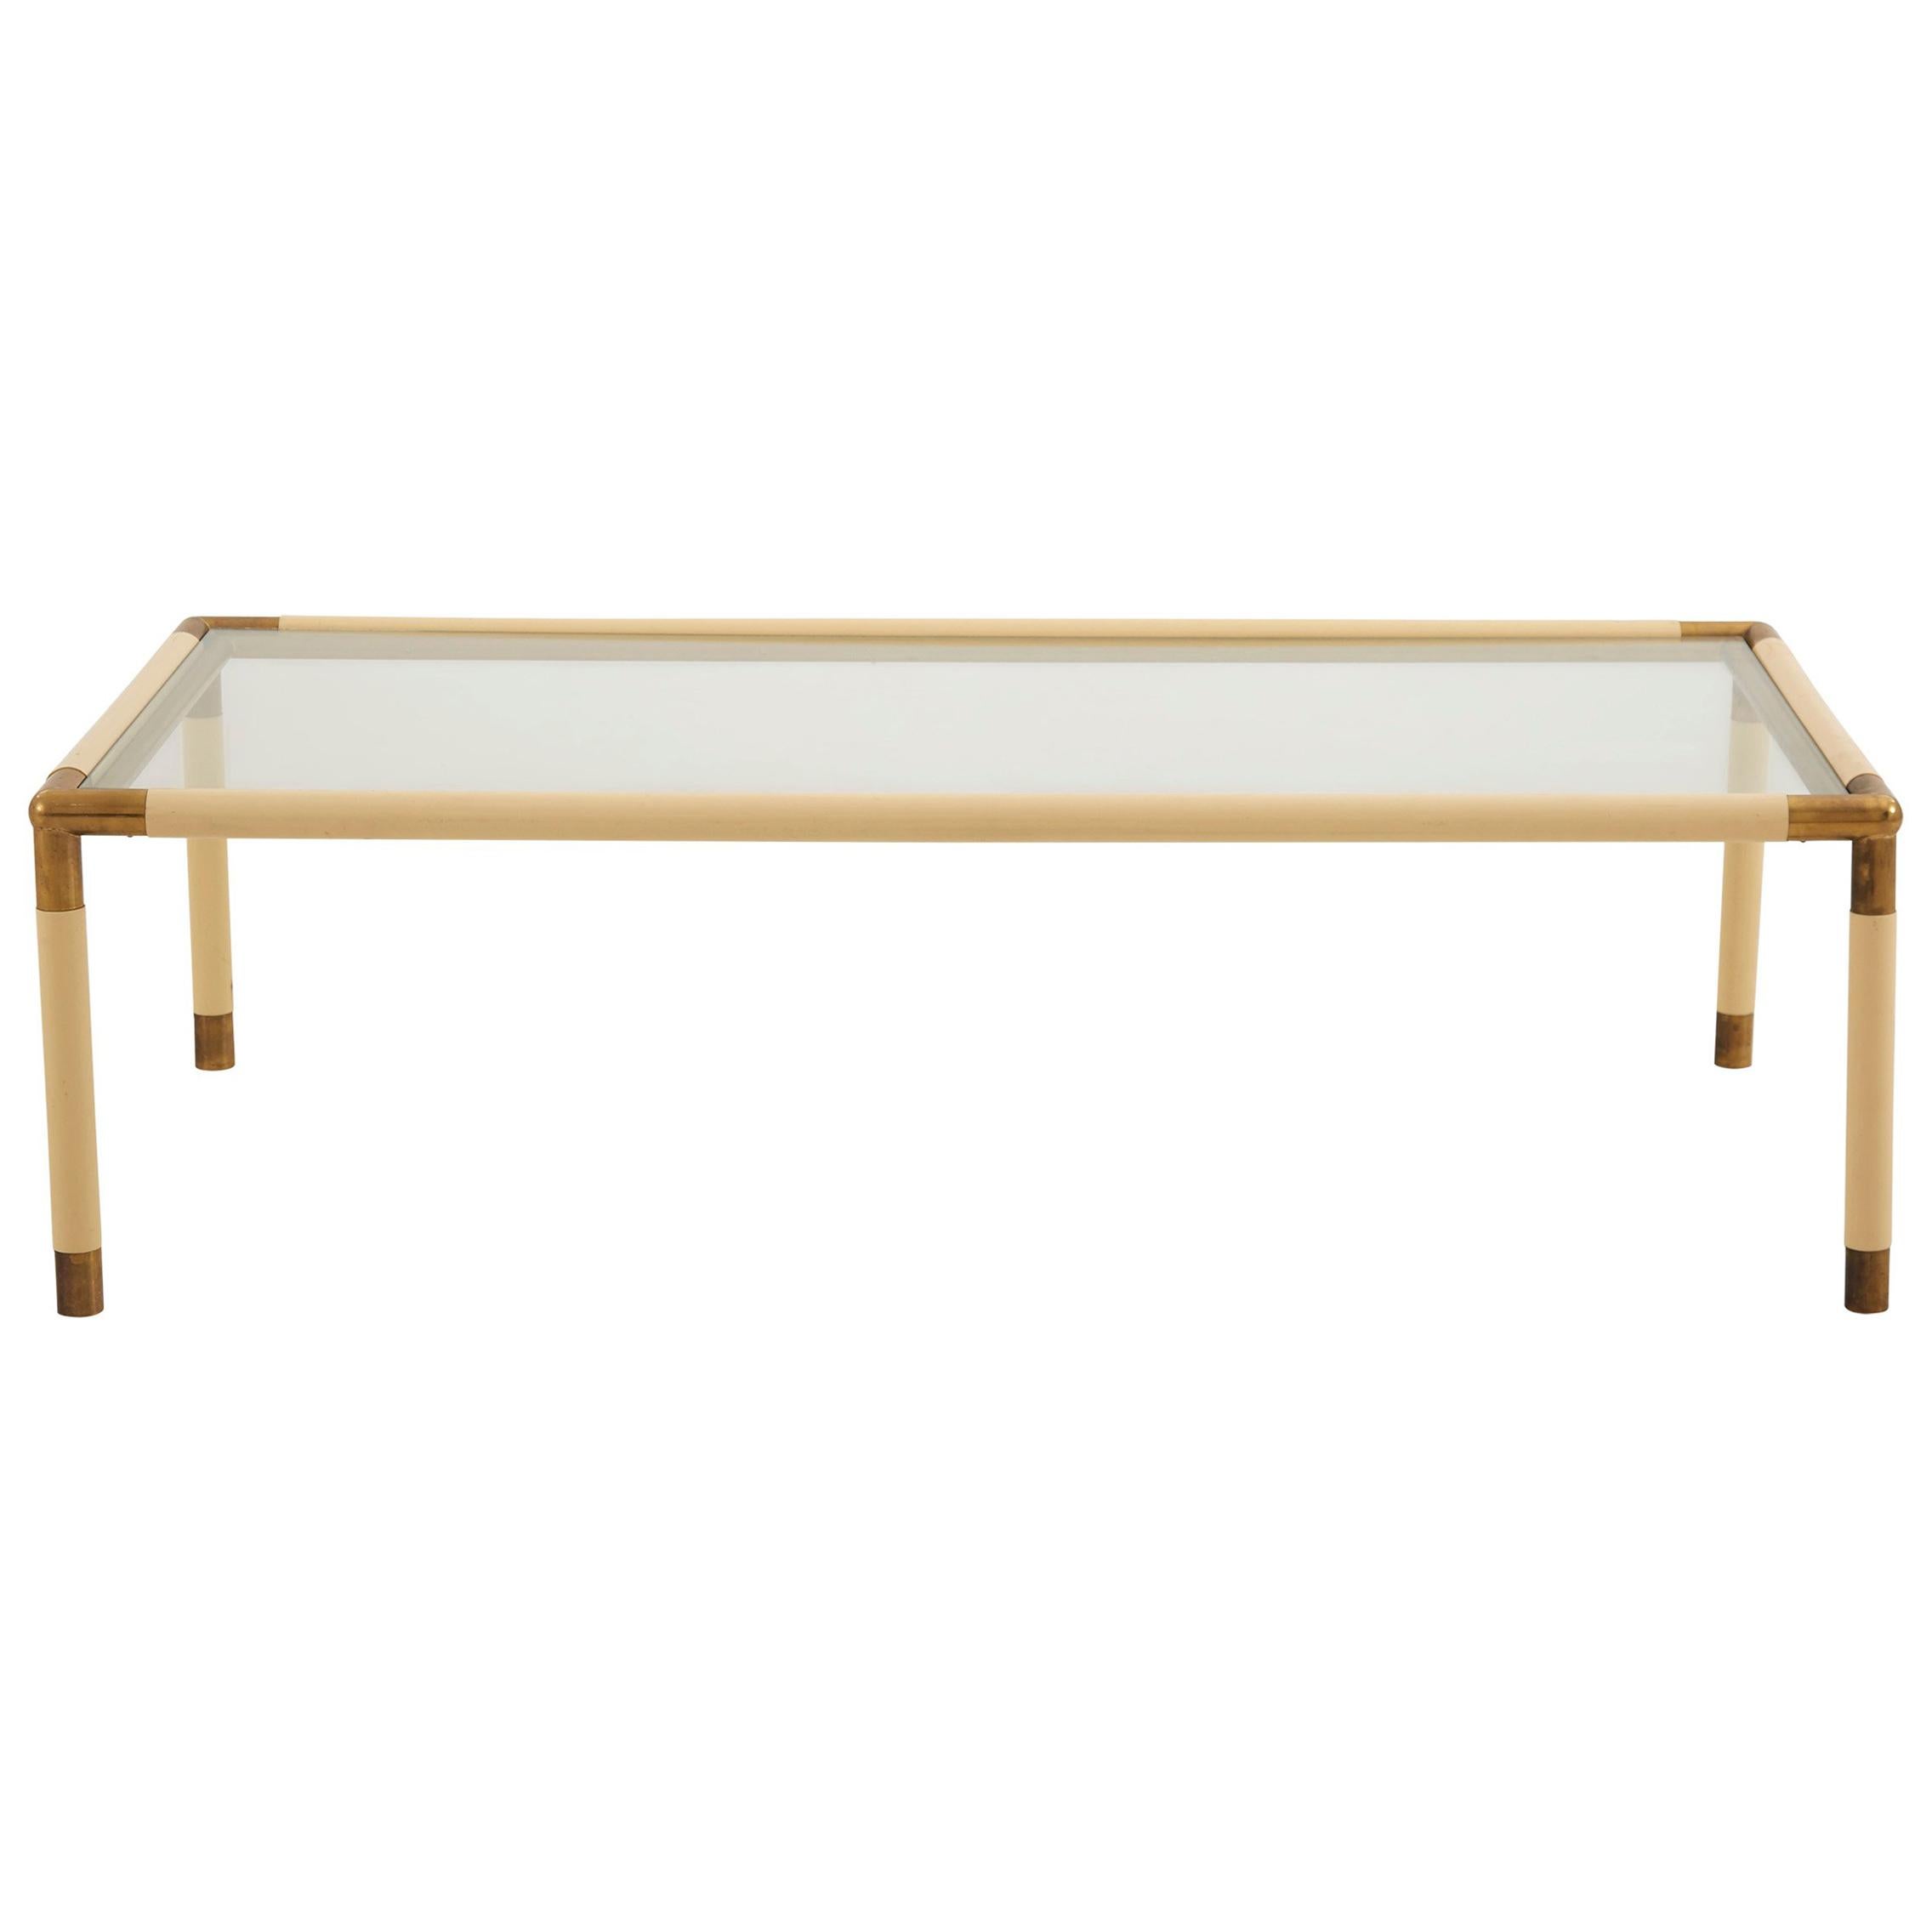 Cream-Colored Metal Coffee Table with Brass Details